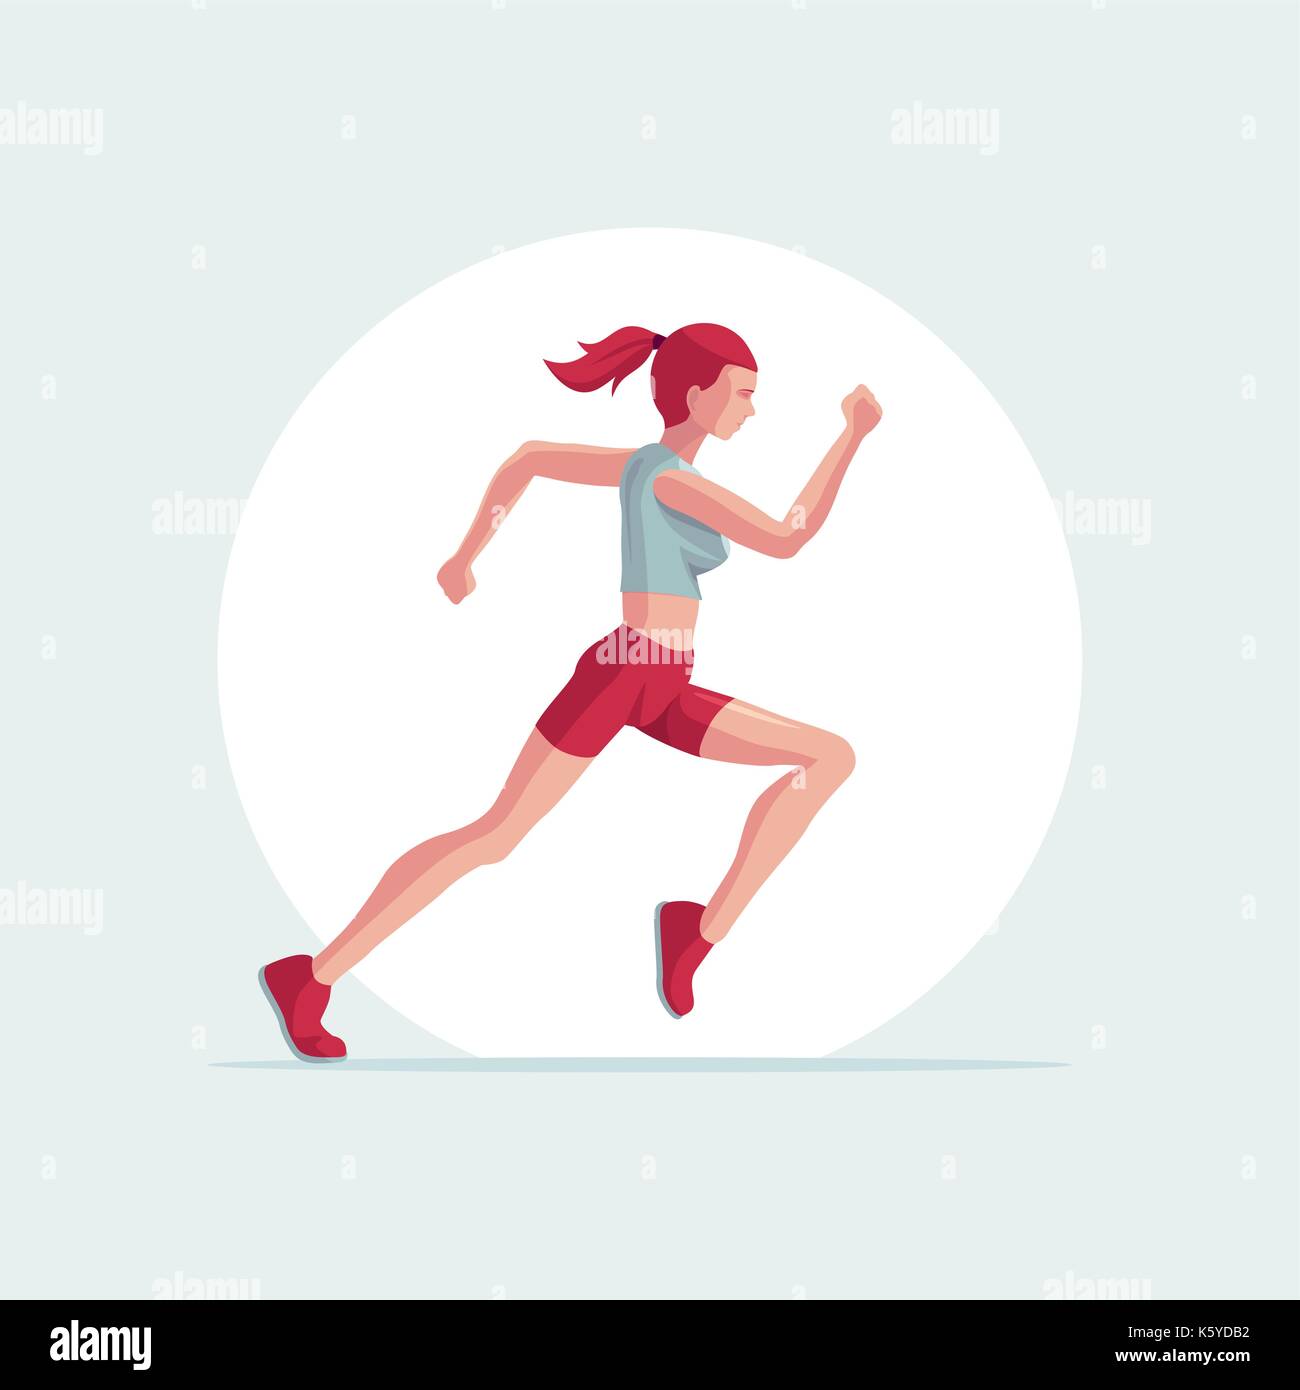 Vector illustration of running woman. Easy editable global colors. Stock Vector